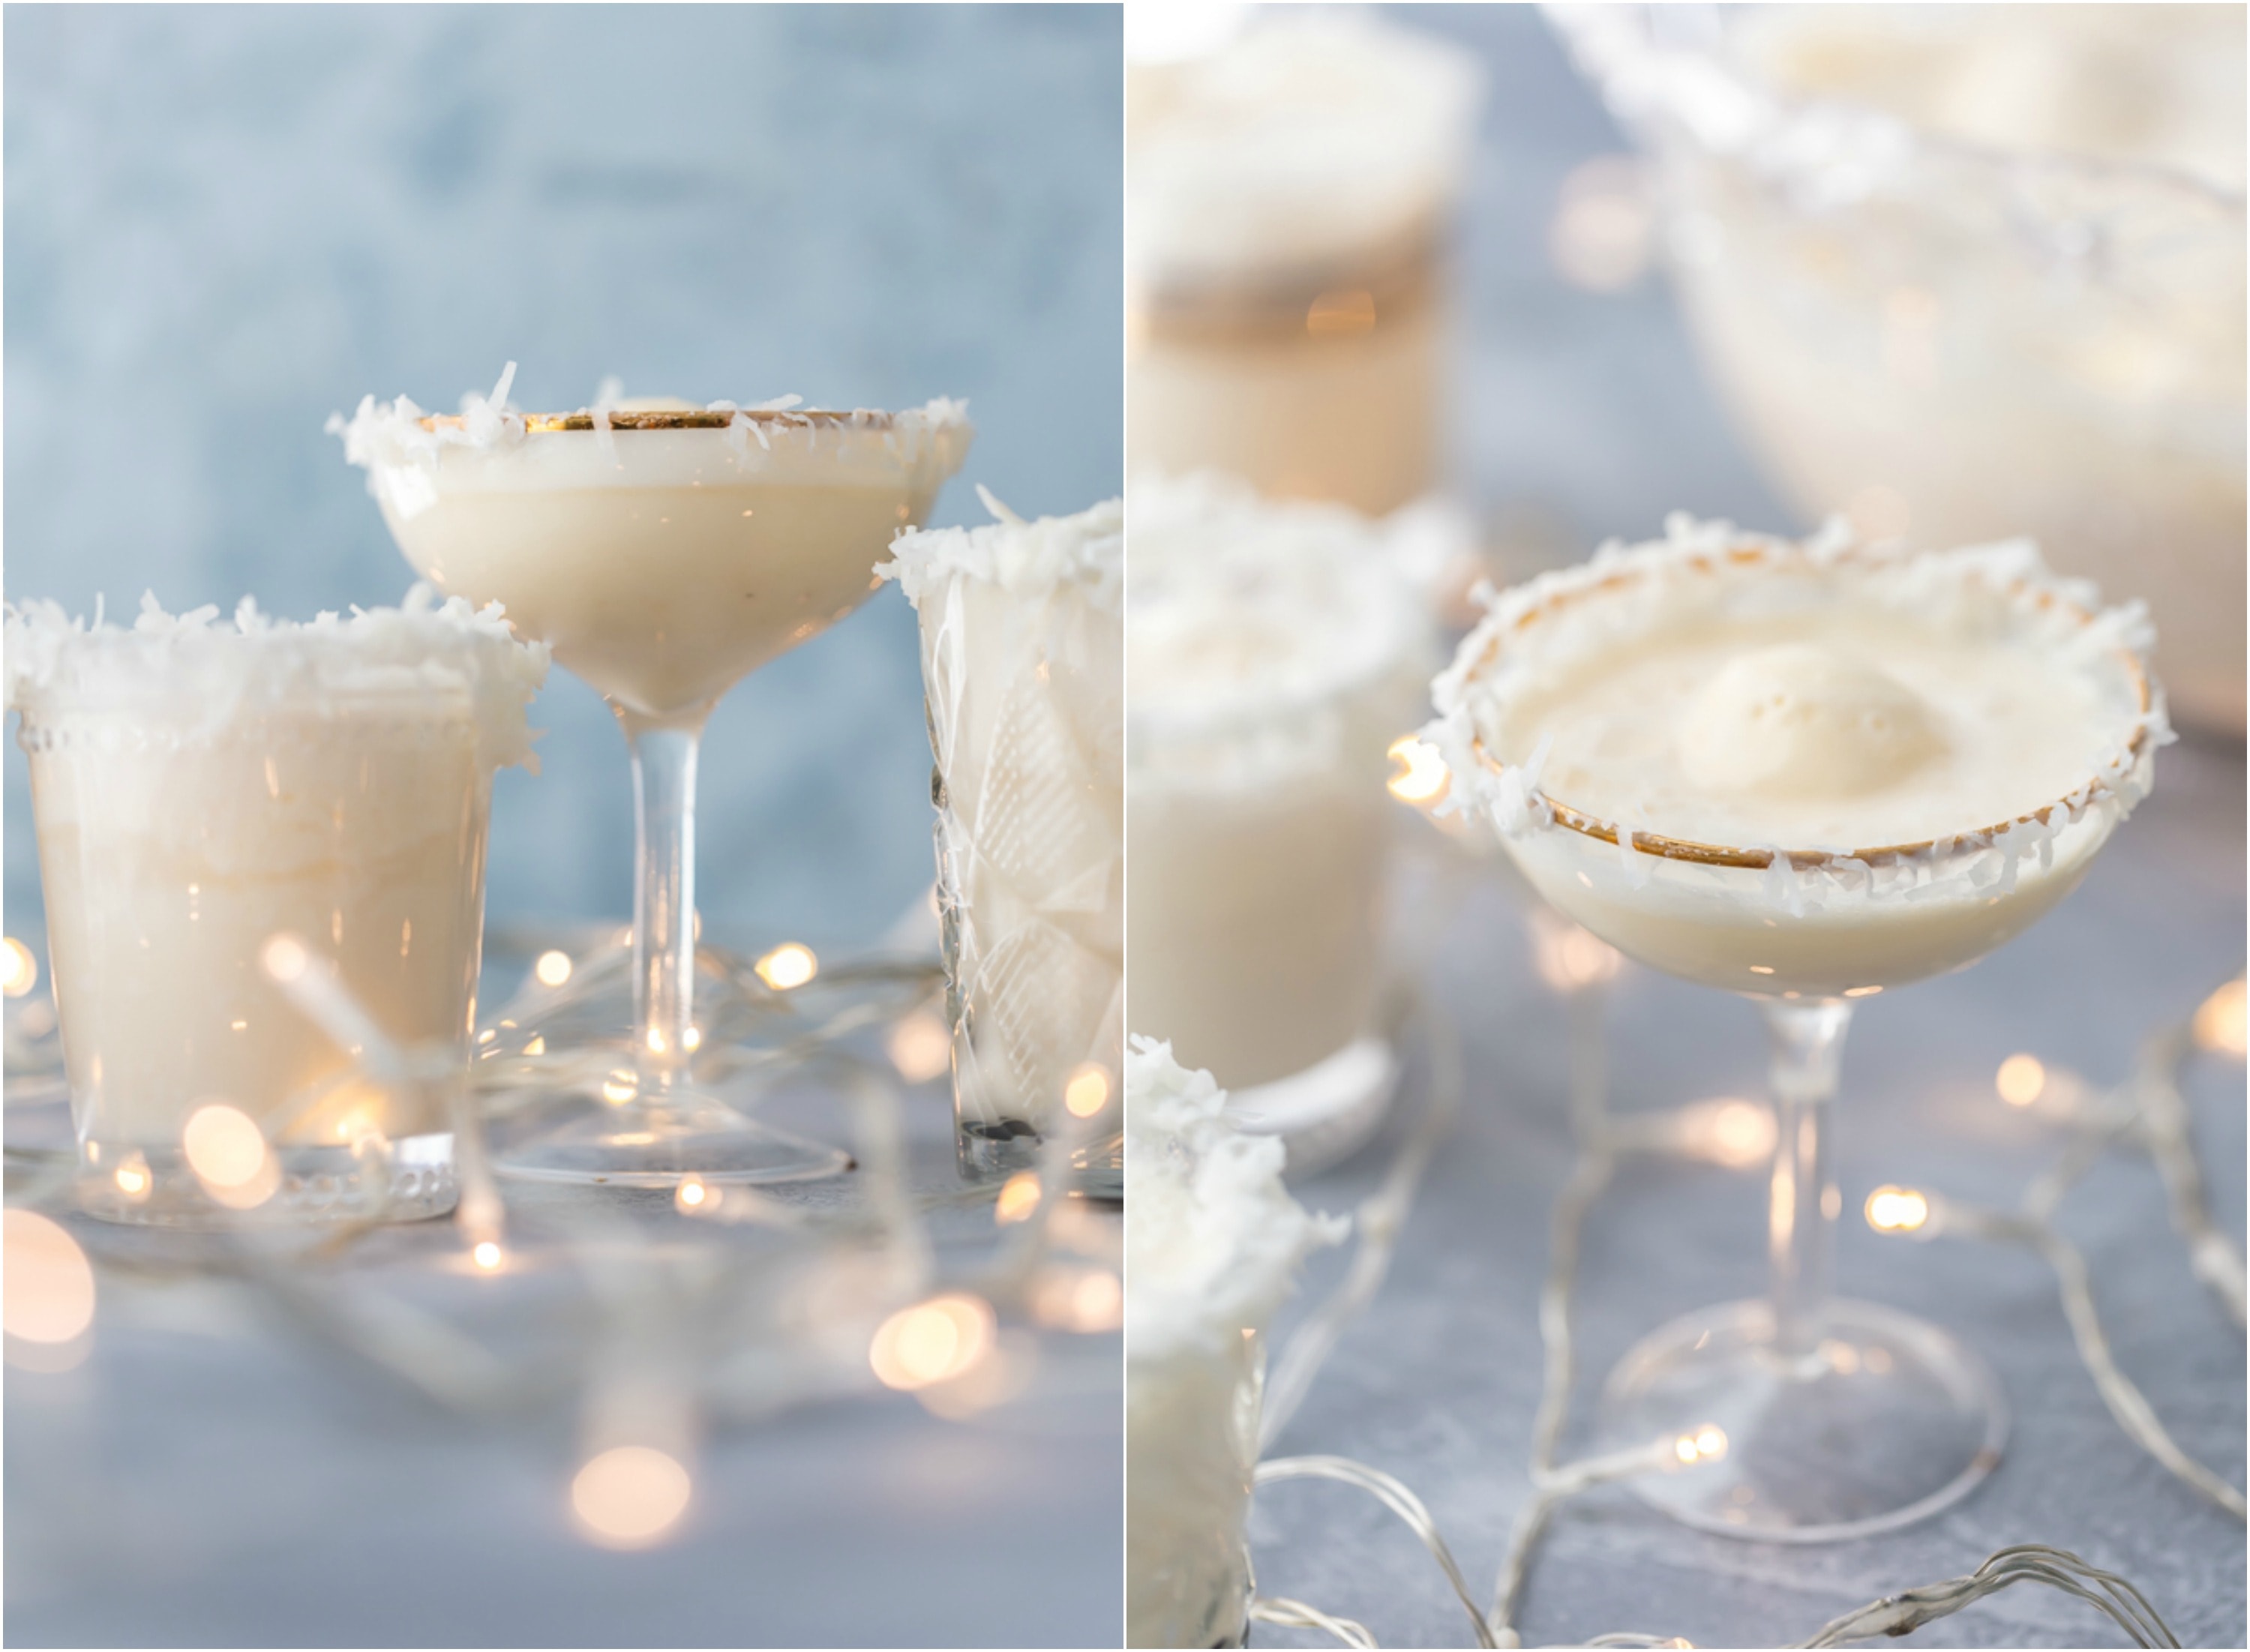 glasses of festive SNOW PUNCH Christmas mocktails. Glass rims garnished with vanilla frosting and shredded coconut